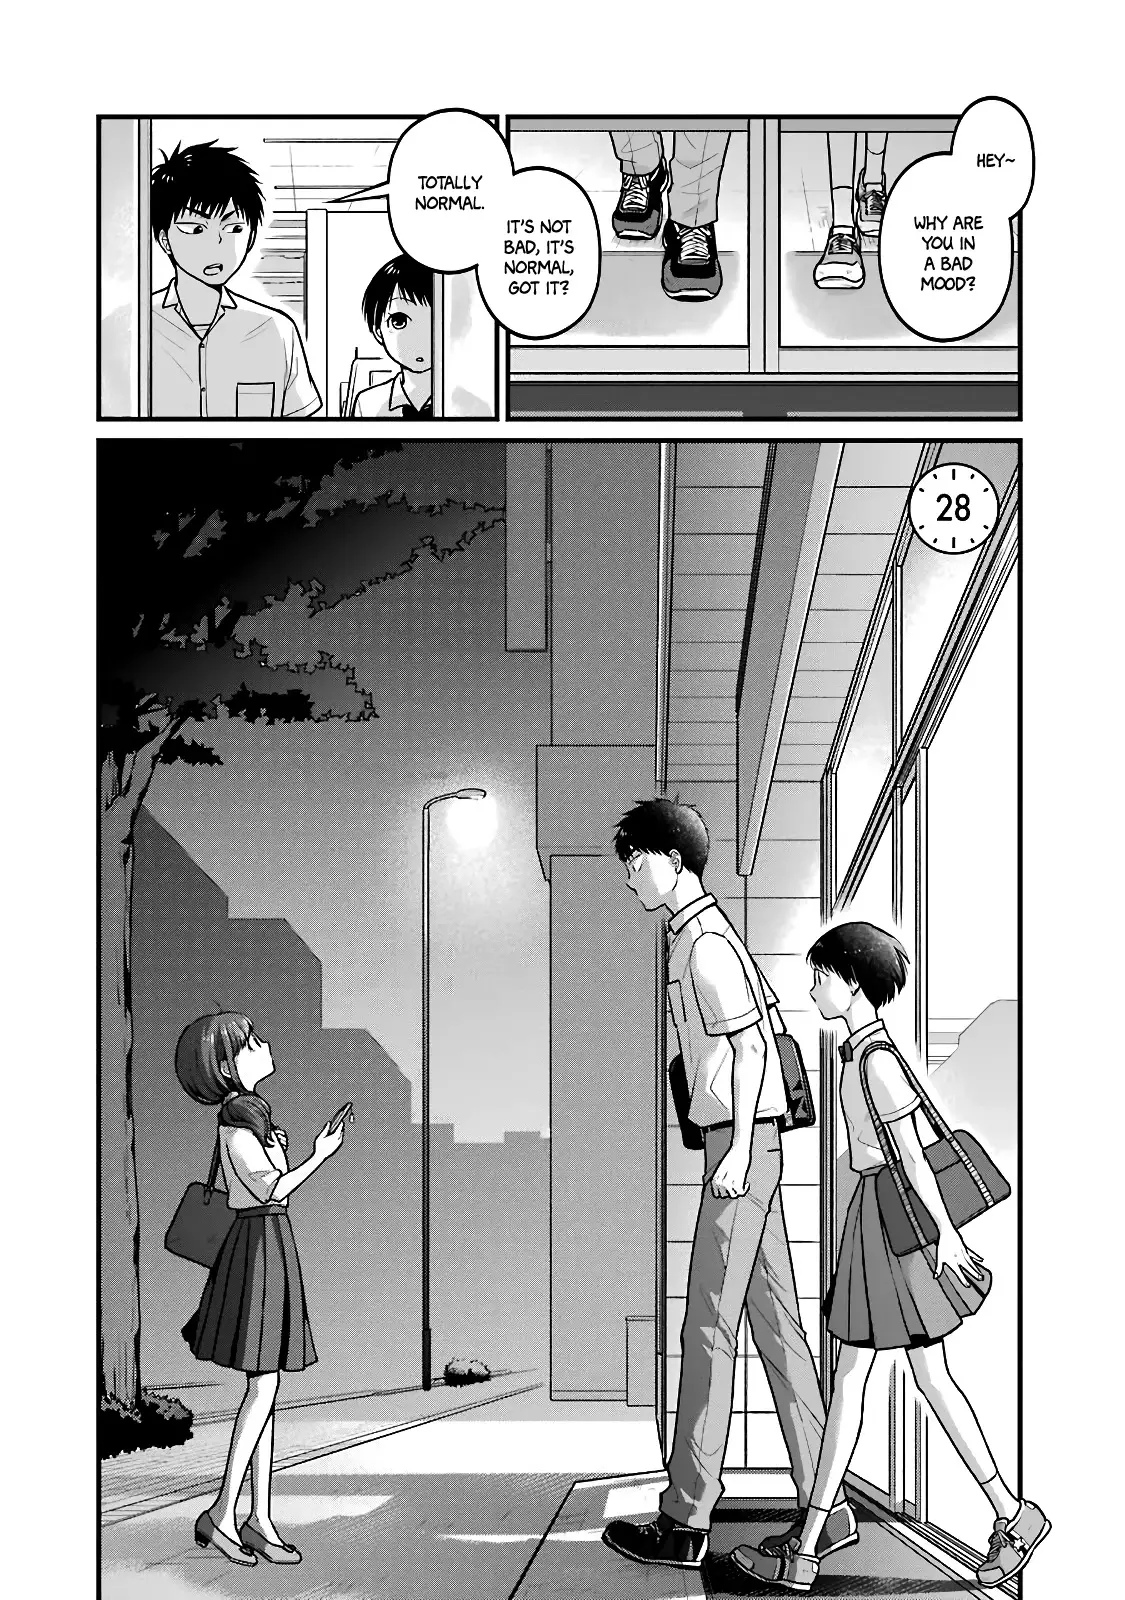 5 Minutes With You At A Convenience Store - 28 page 2